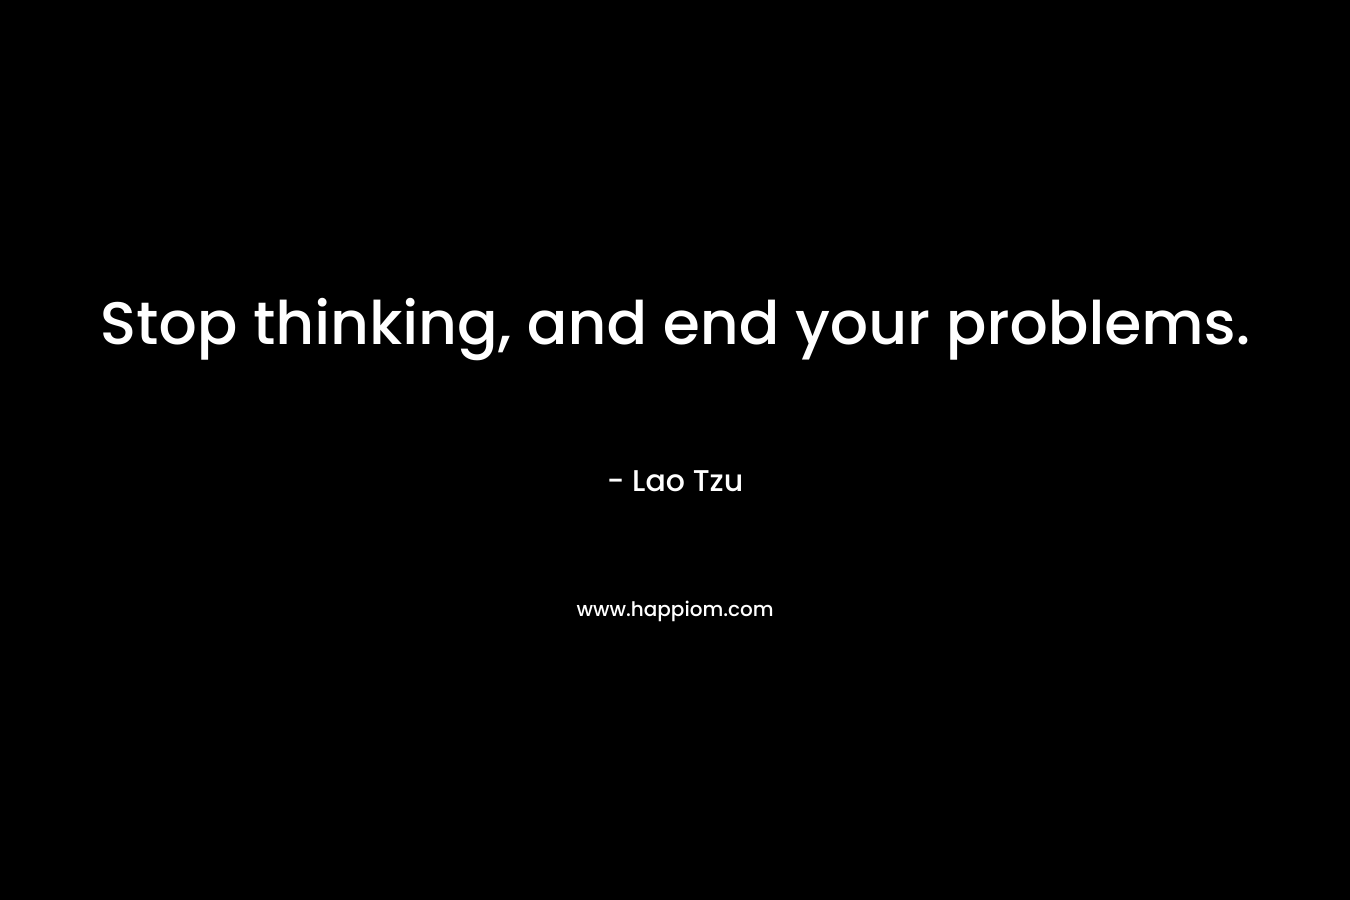 Stop thinking, and end your problems. – Lao Tzu